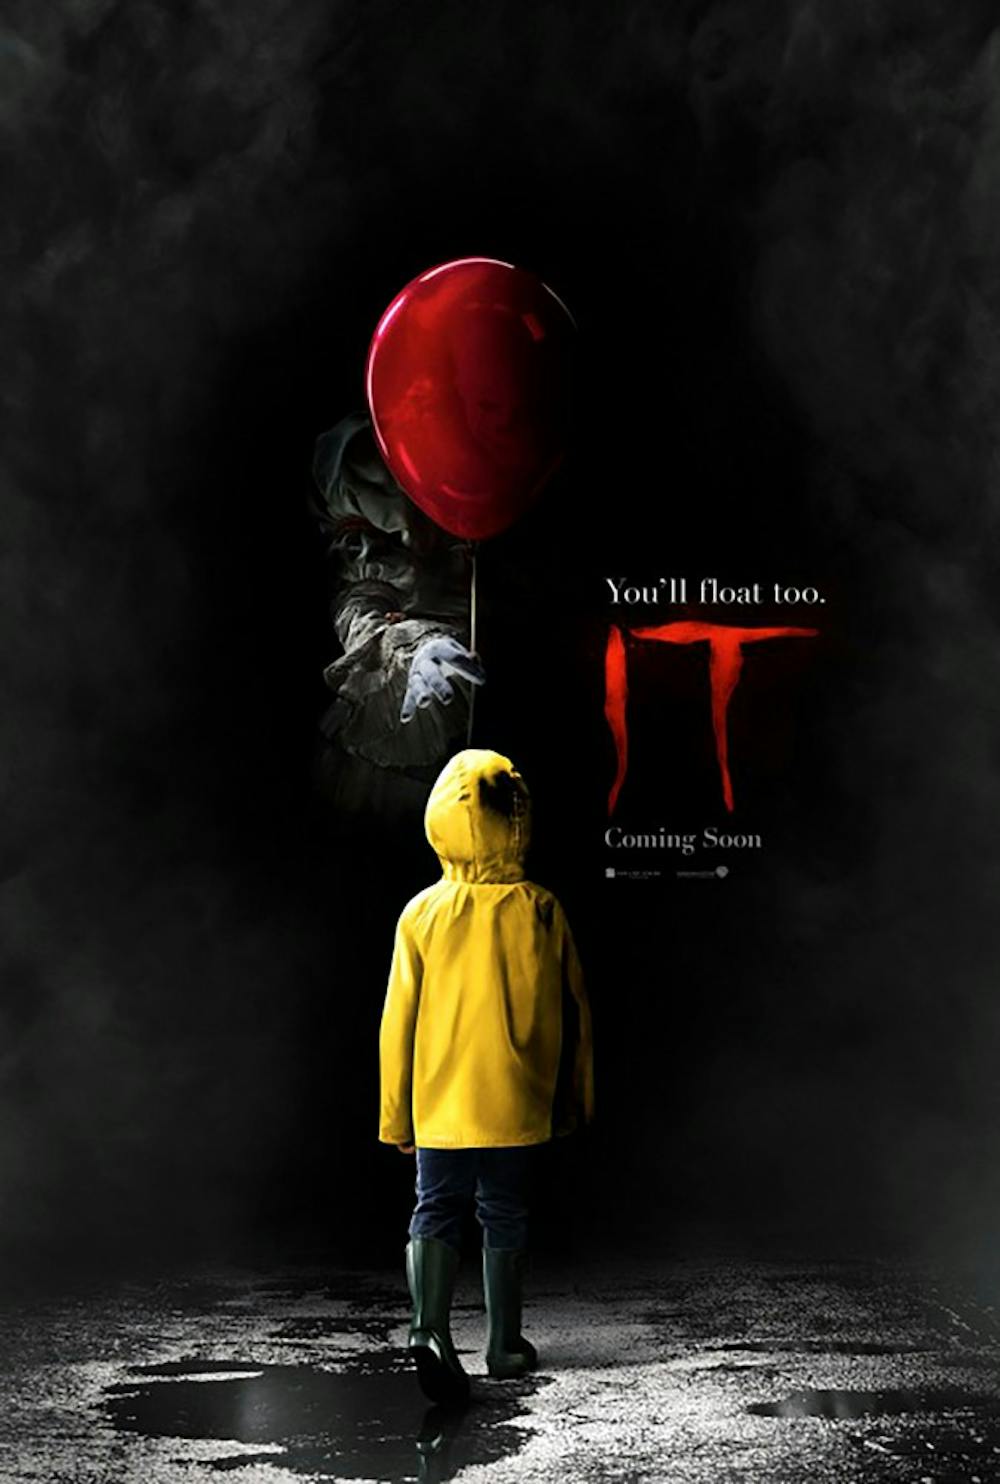 <p>The Halloween scares come early this year as horror movies fill cinemas. “It” is an adaptation of the Stephen King novel of the same name, telling the story of a group of kids battling a shapeshifting clown in a small town in Maine.&nbsp;</p>